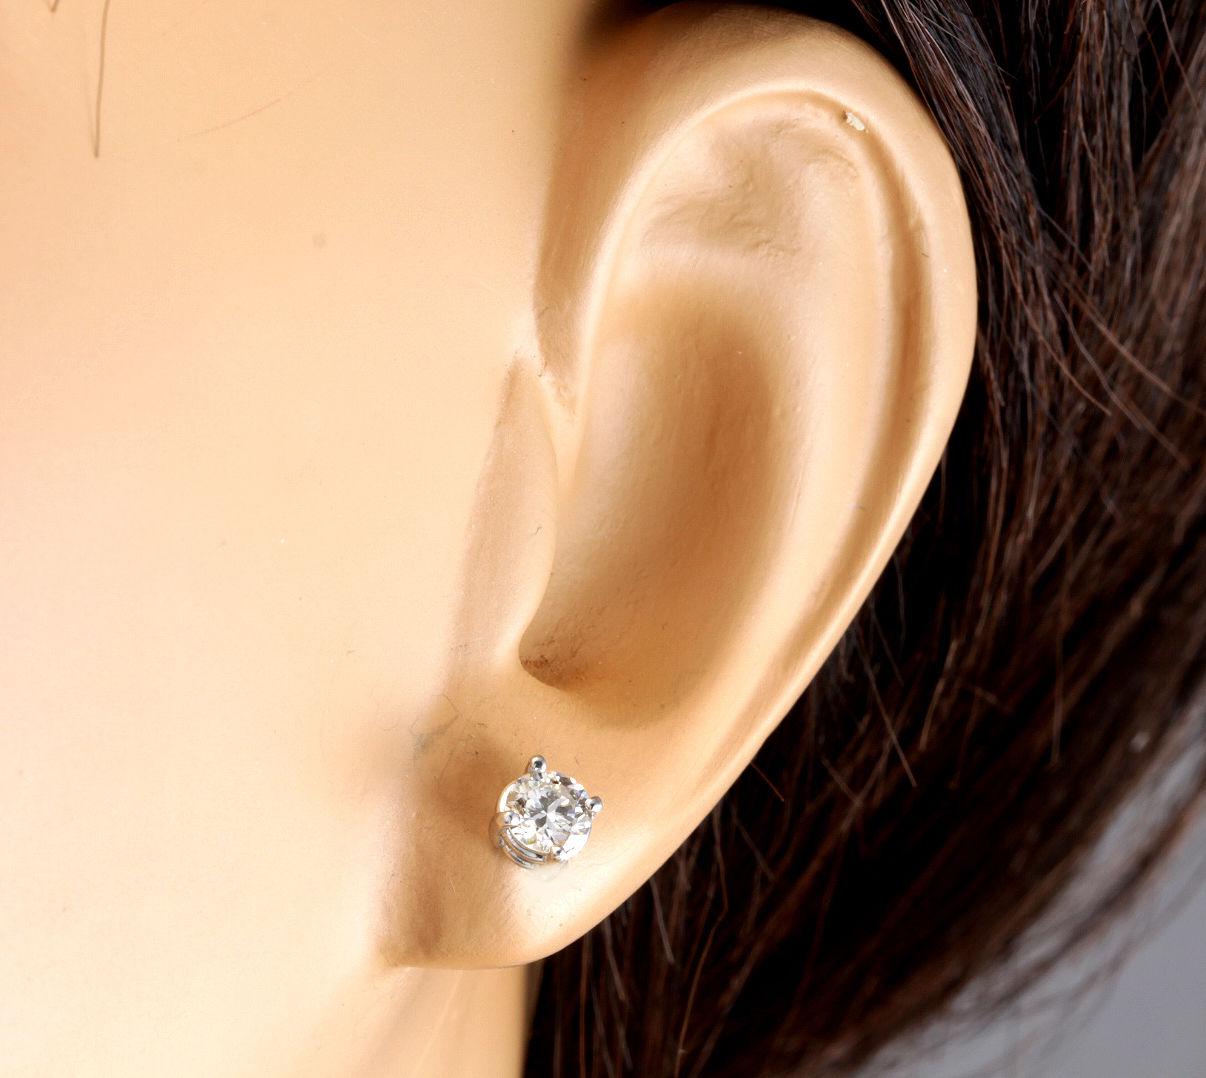 Women's Exquisite 1.00 Carat Natural Diamond 14 Karat Solid White Gold Stud Earrings For Sale